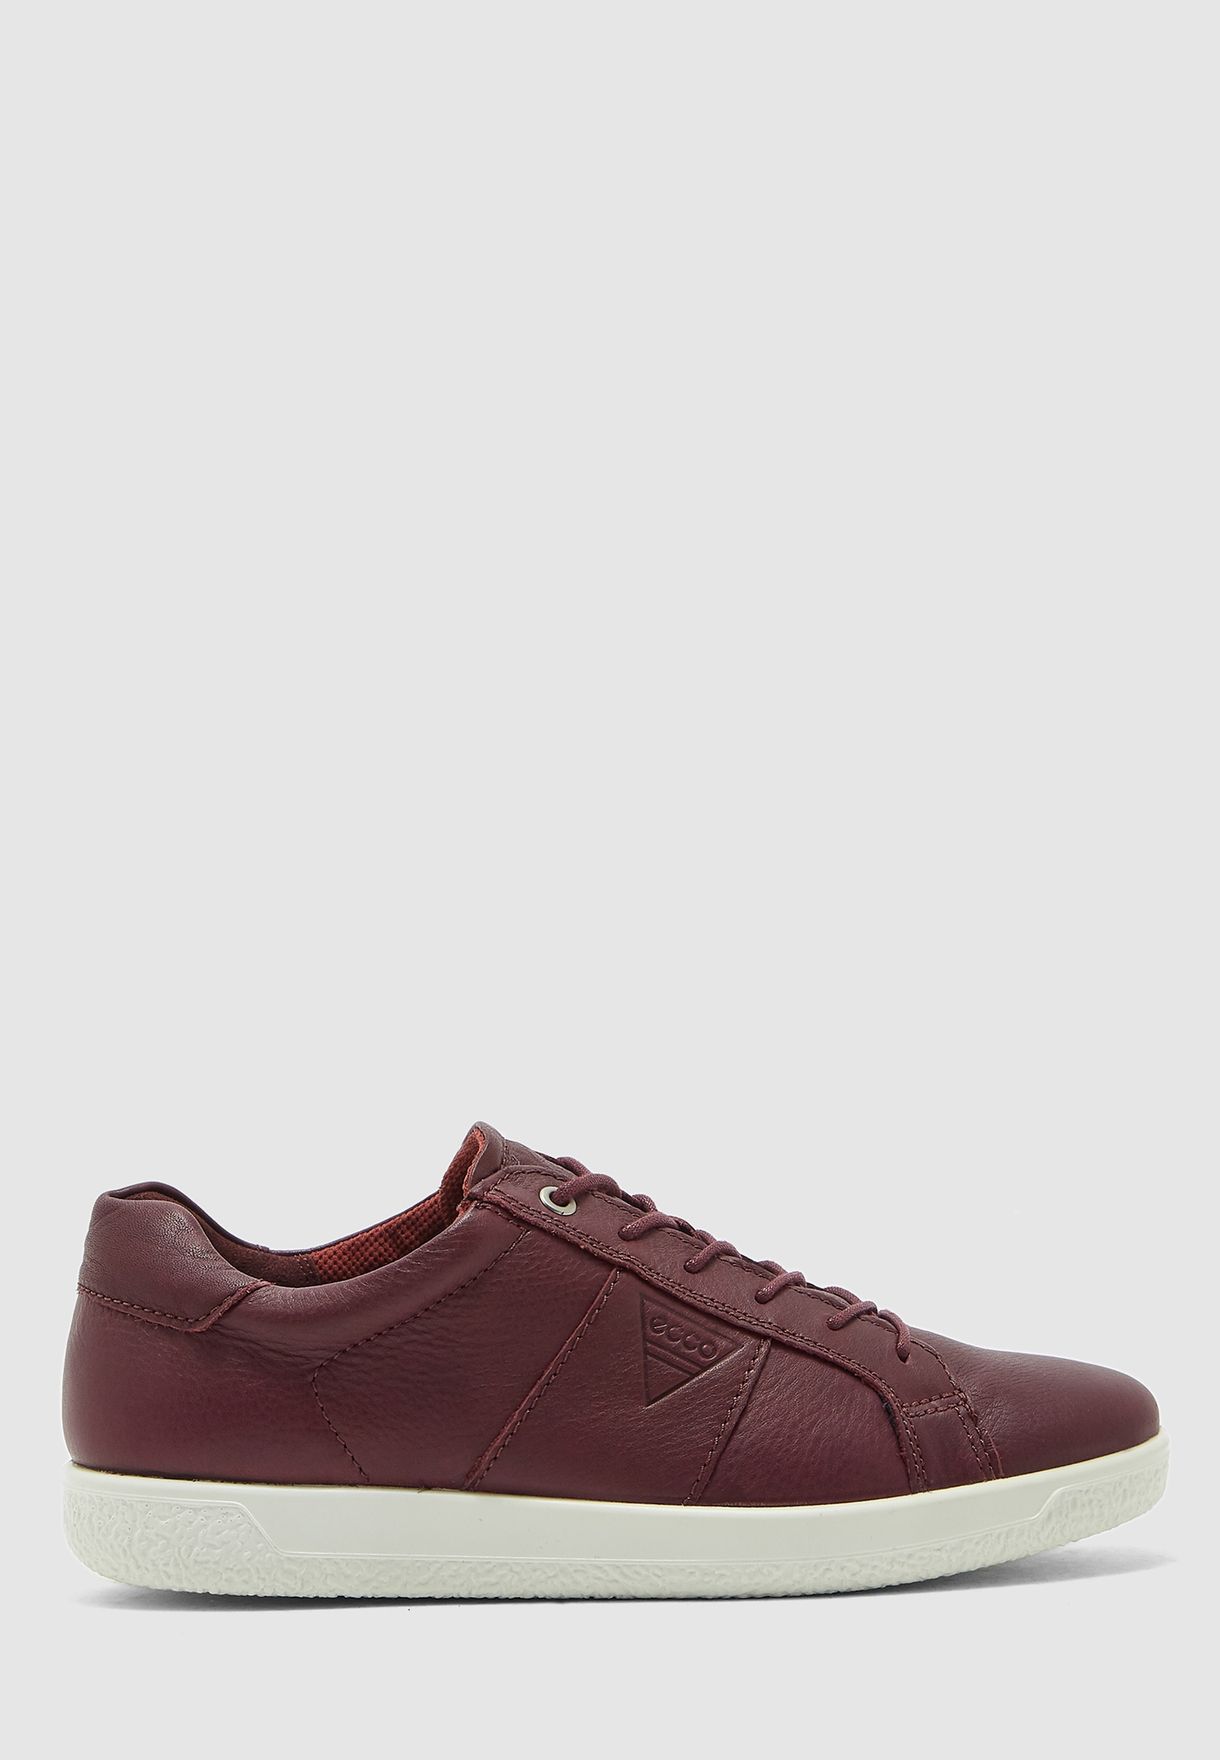 Alice Nyttig At Buy Ecco red Soft 1 Sneakers for Men in MENA, Worldwide